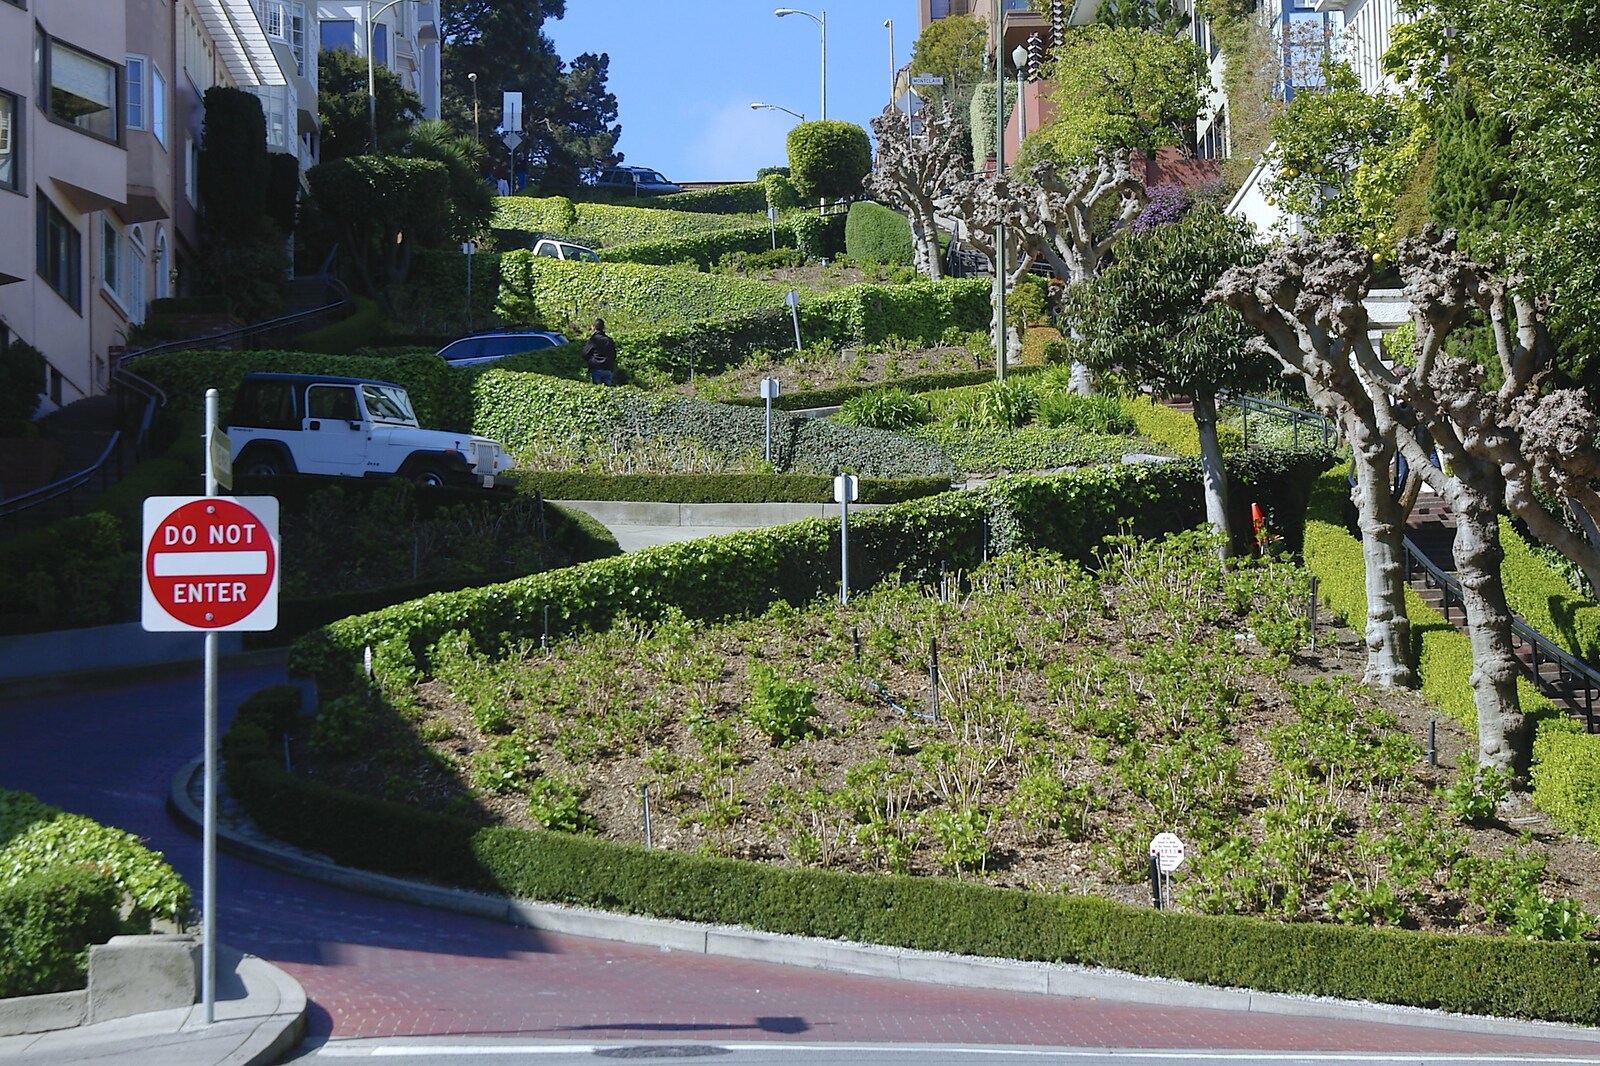 Lombard Street - the famous zigzag from Chinatown, Telegraph Hill and Fisherman's Wharf, San Francisco, California, US - 11th March 2006